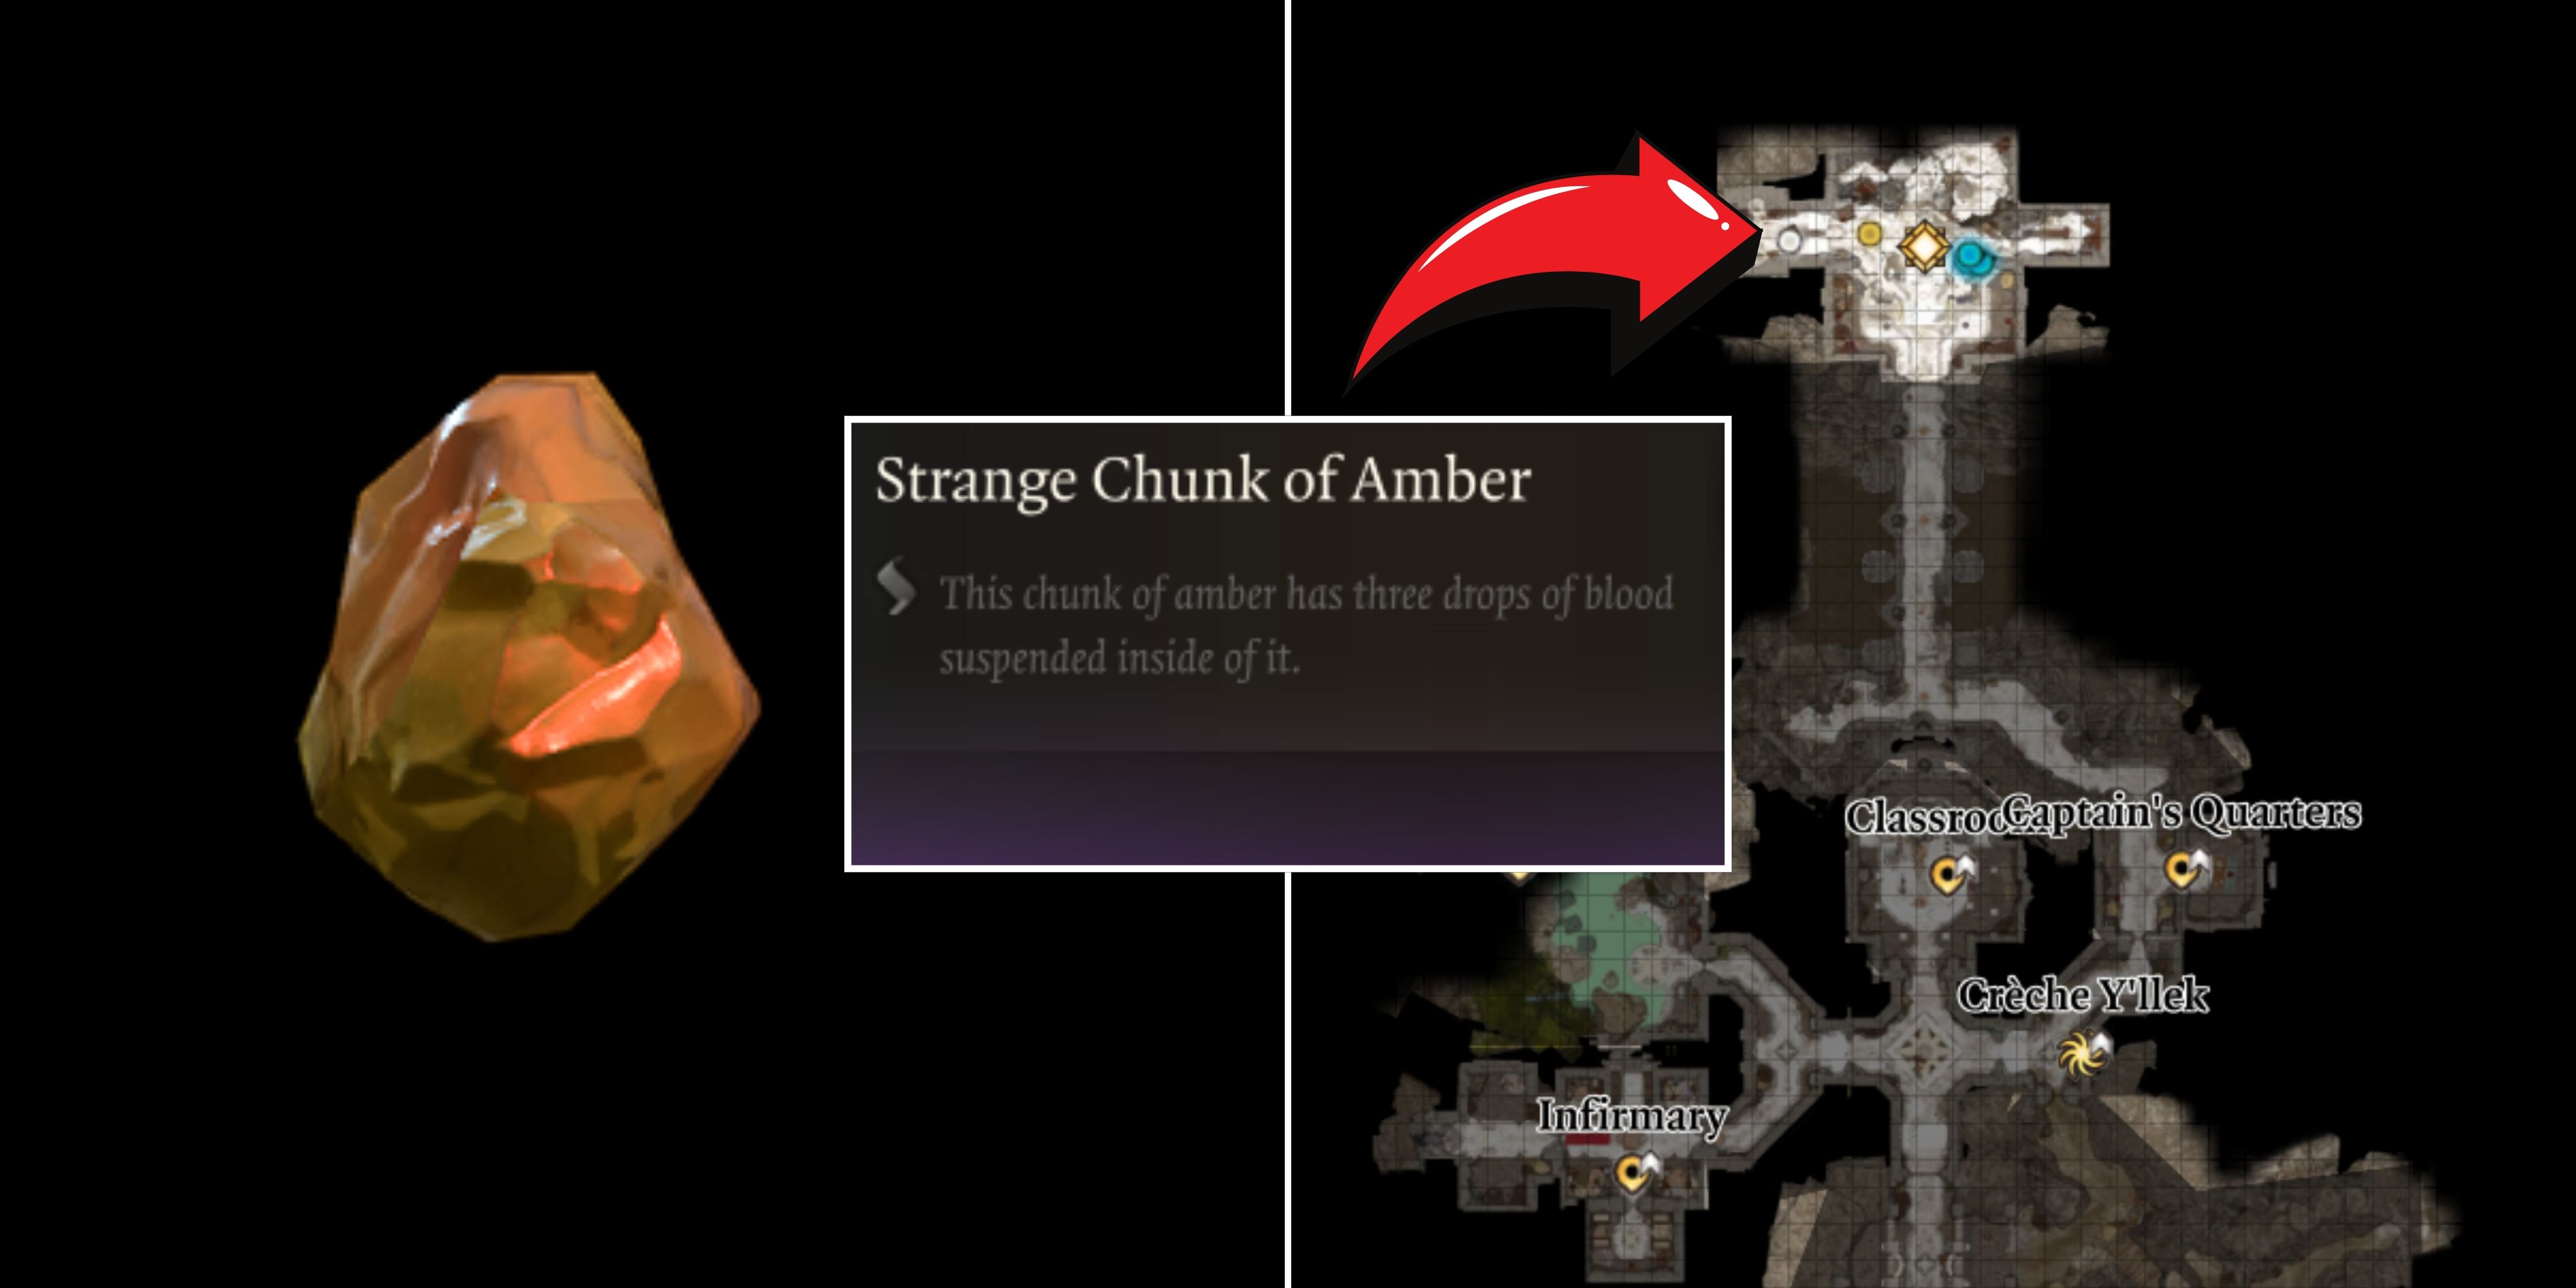 How to Use the Strange Chunk of Amber in Baldur's Gate 3 feature image